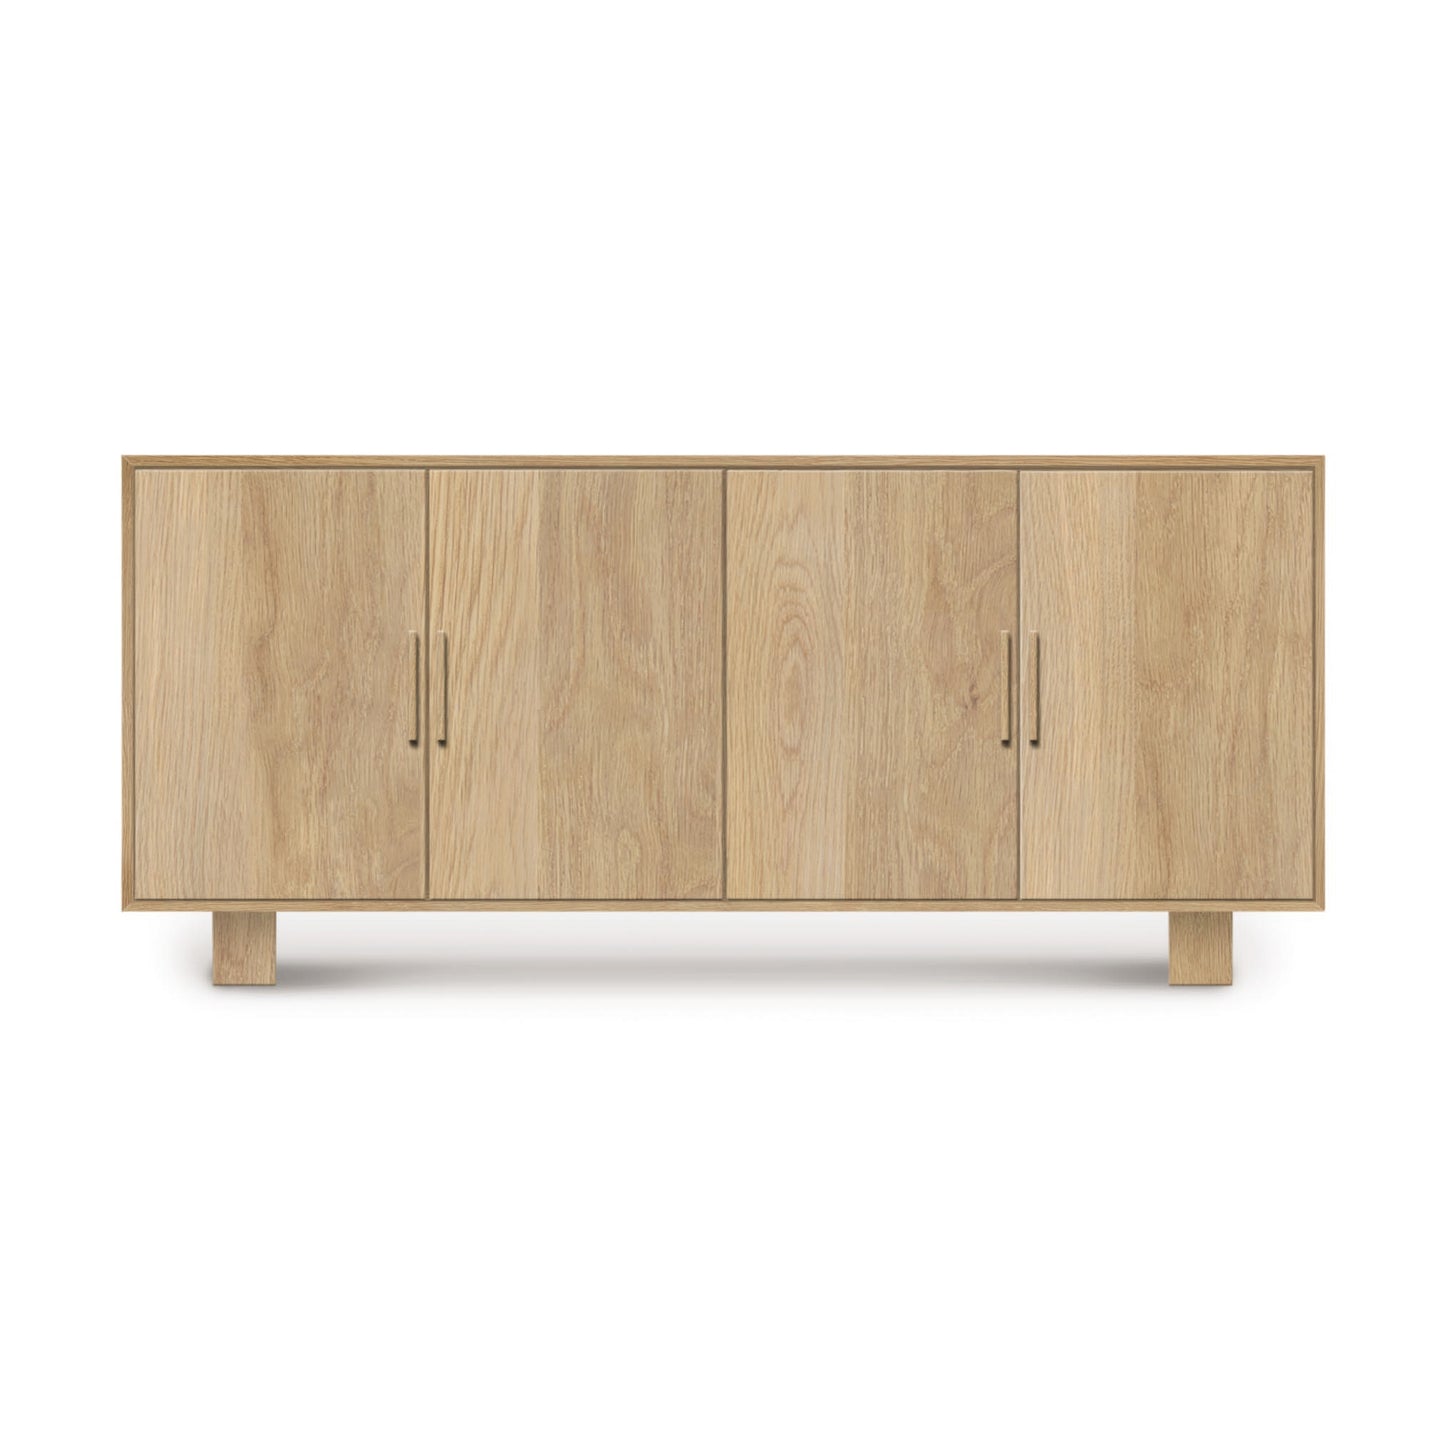 An Iso Oak 4-Door Buffet by Copeland Furniture, crafted from solid hardwood oak, with short legs, isolated on a white background.